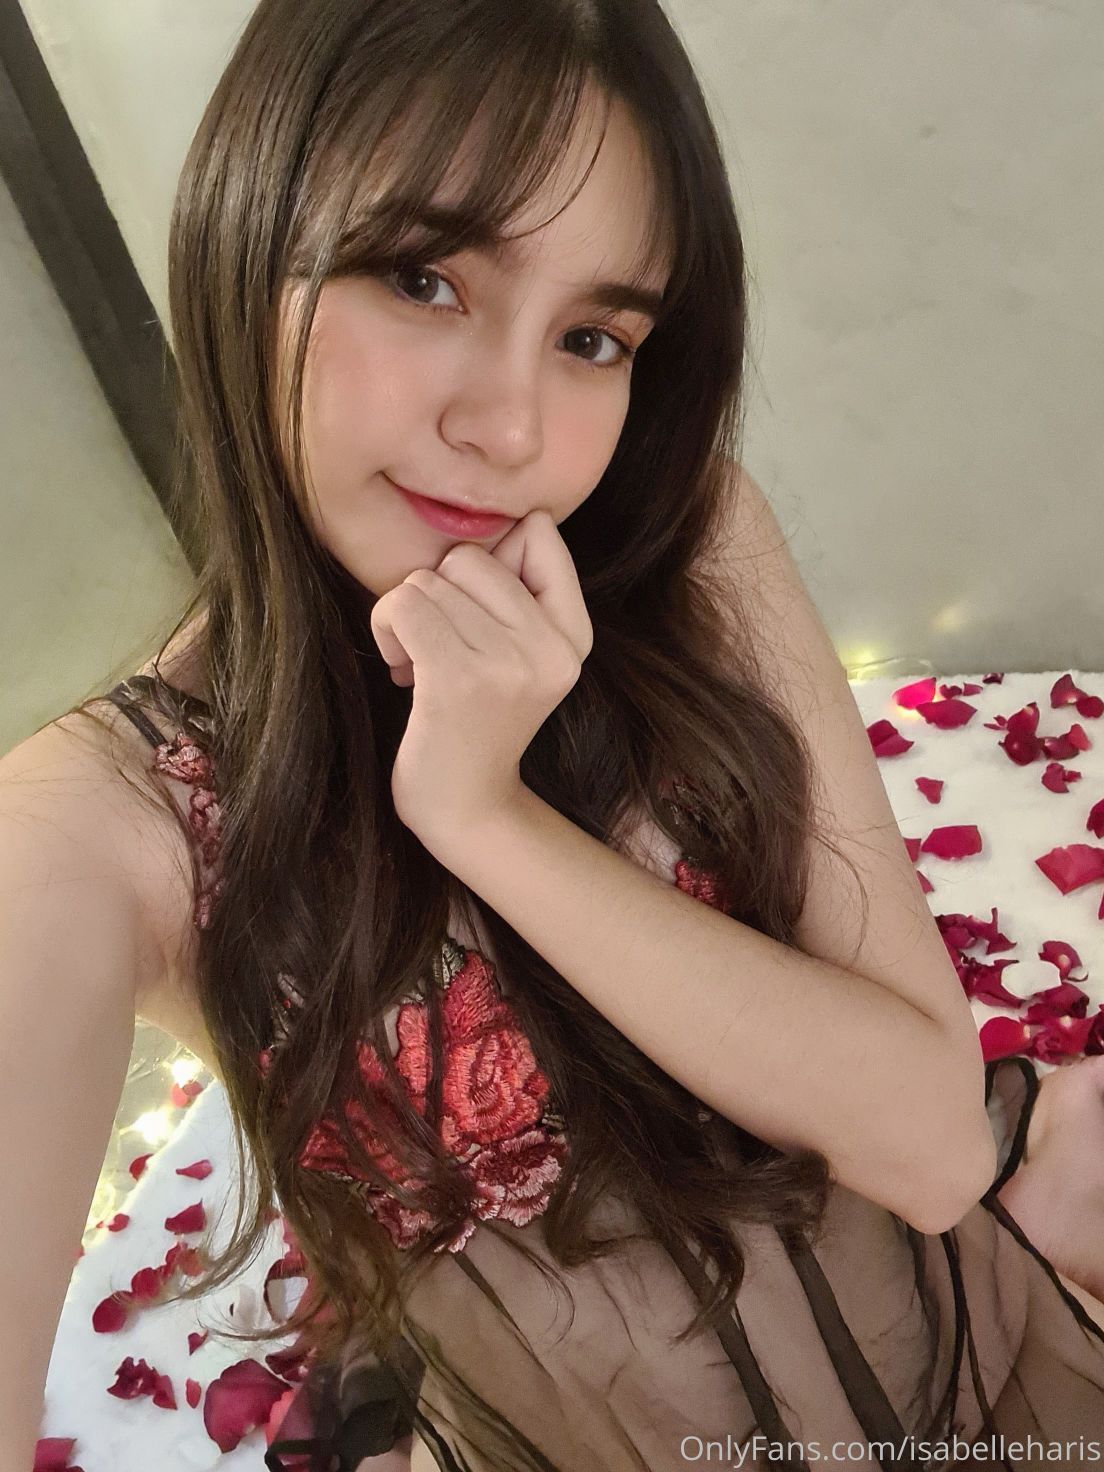 AsianOnlyfans 121 219 20211024